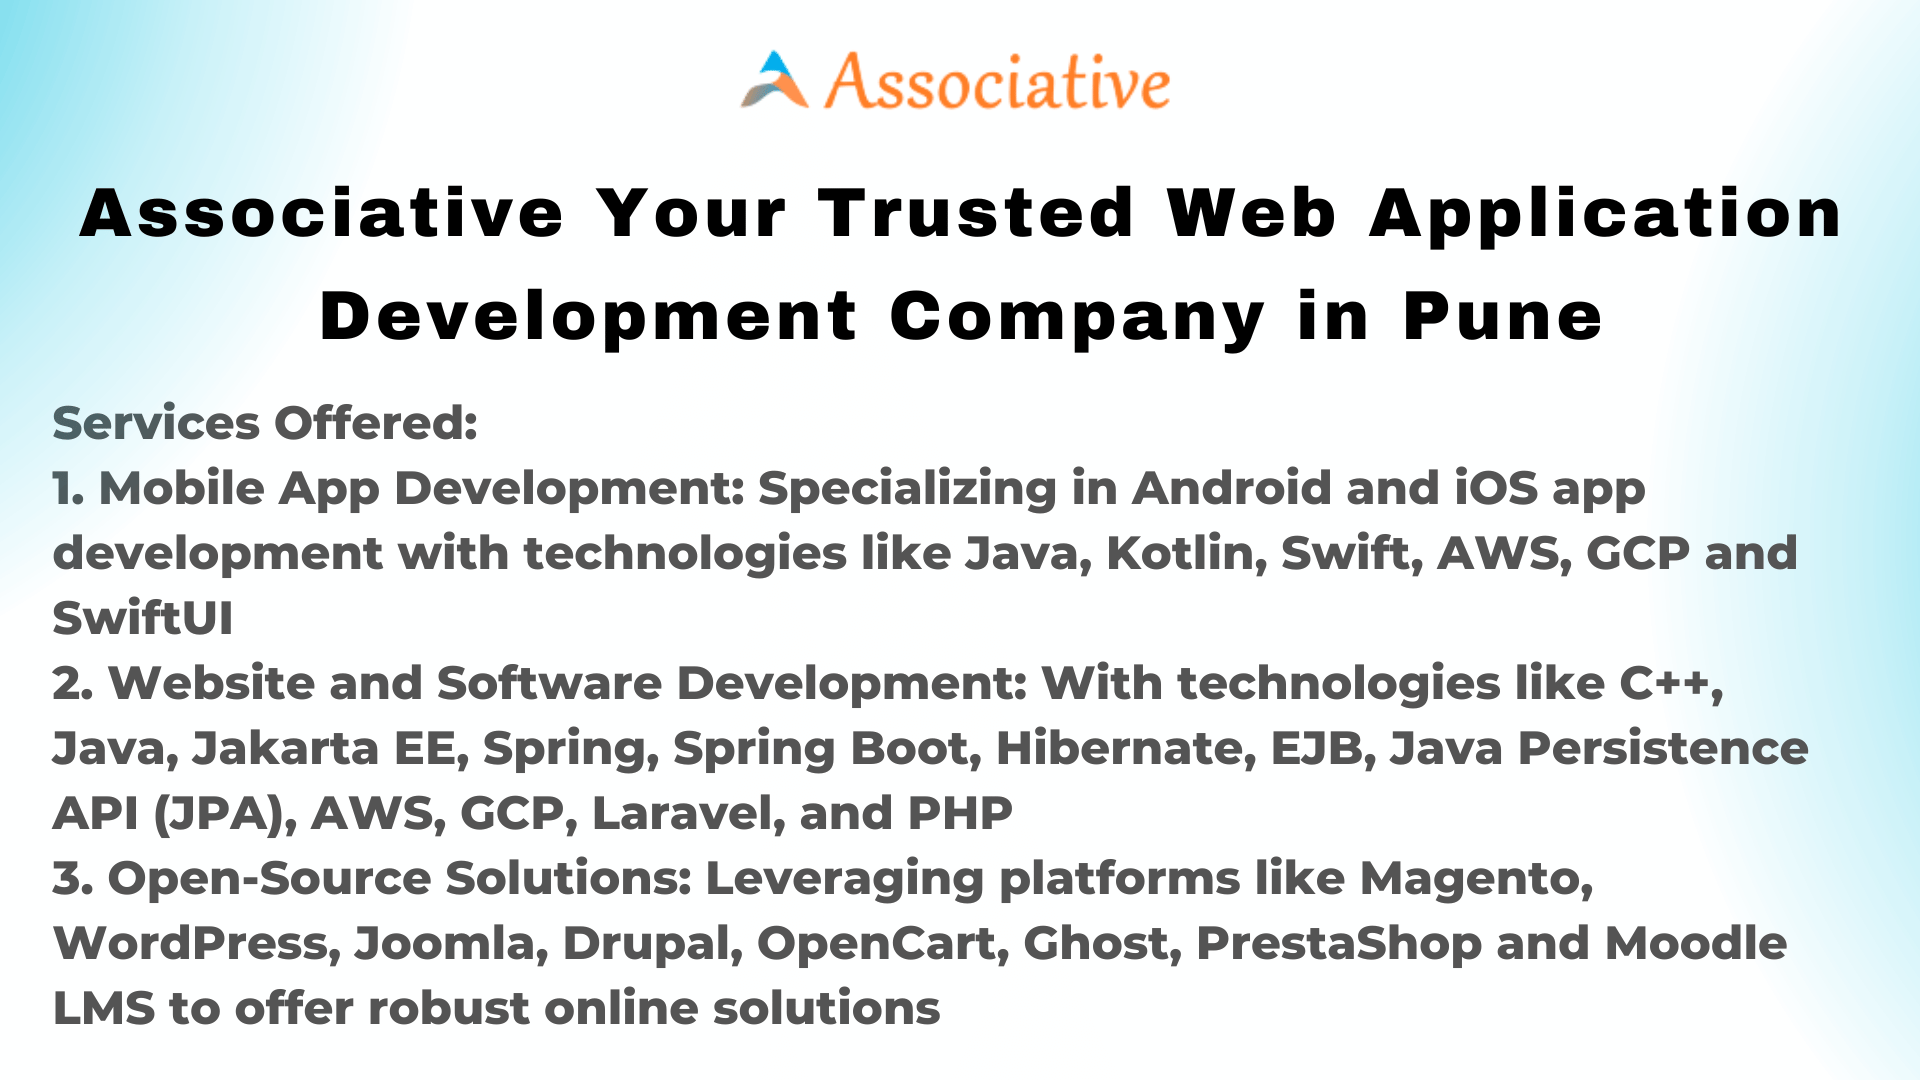 Associative Your Trusted Web Application Development Company in Pune